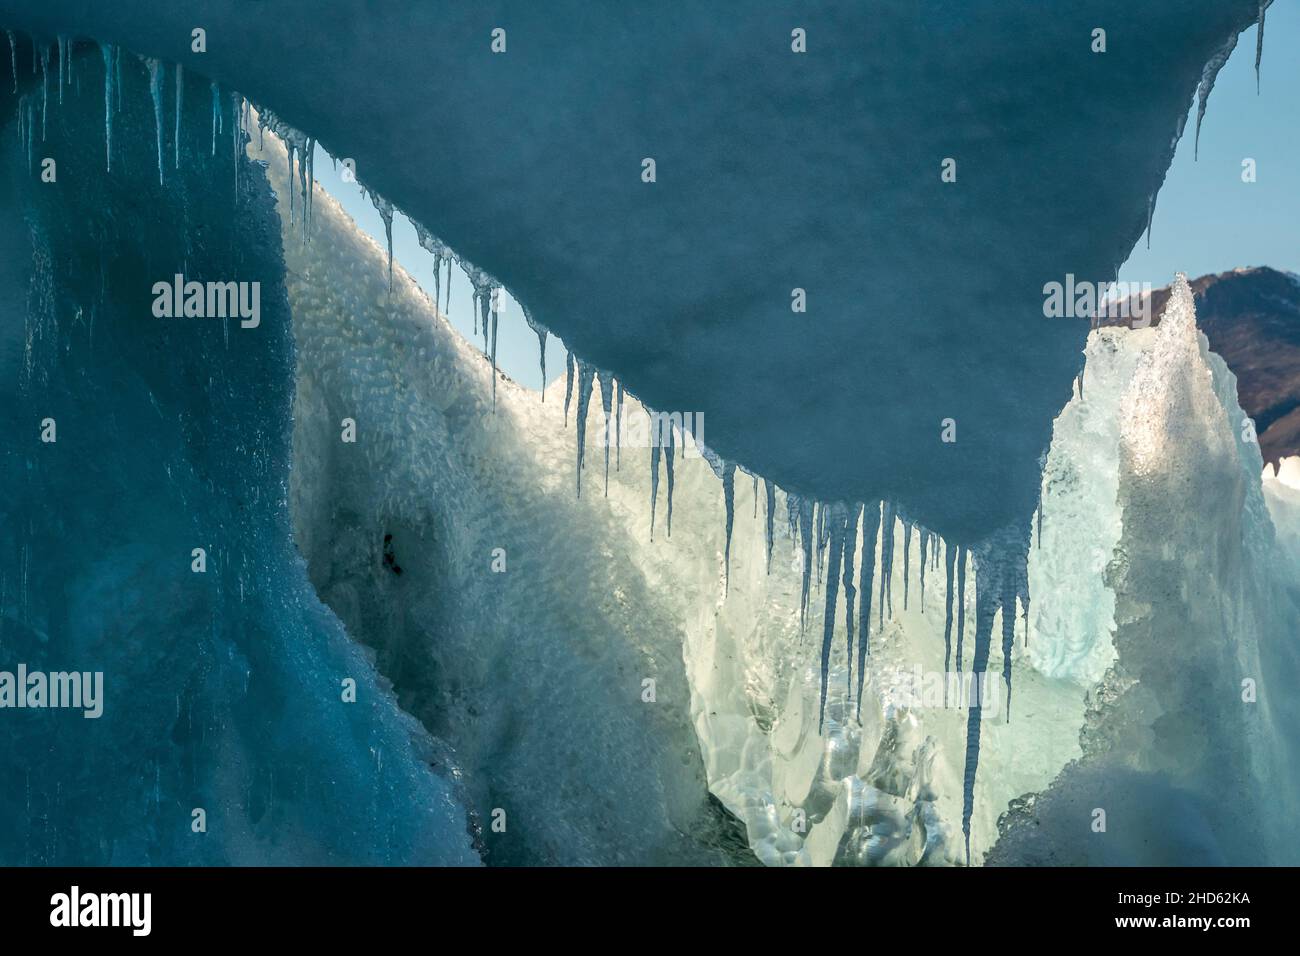 Dripping icicles, old iceberg, Rodefjord, Scoresby Sund, East Greenland Stock Photo